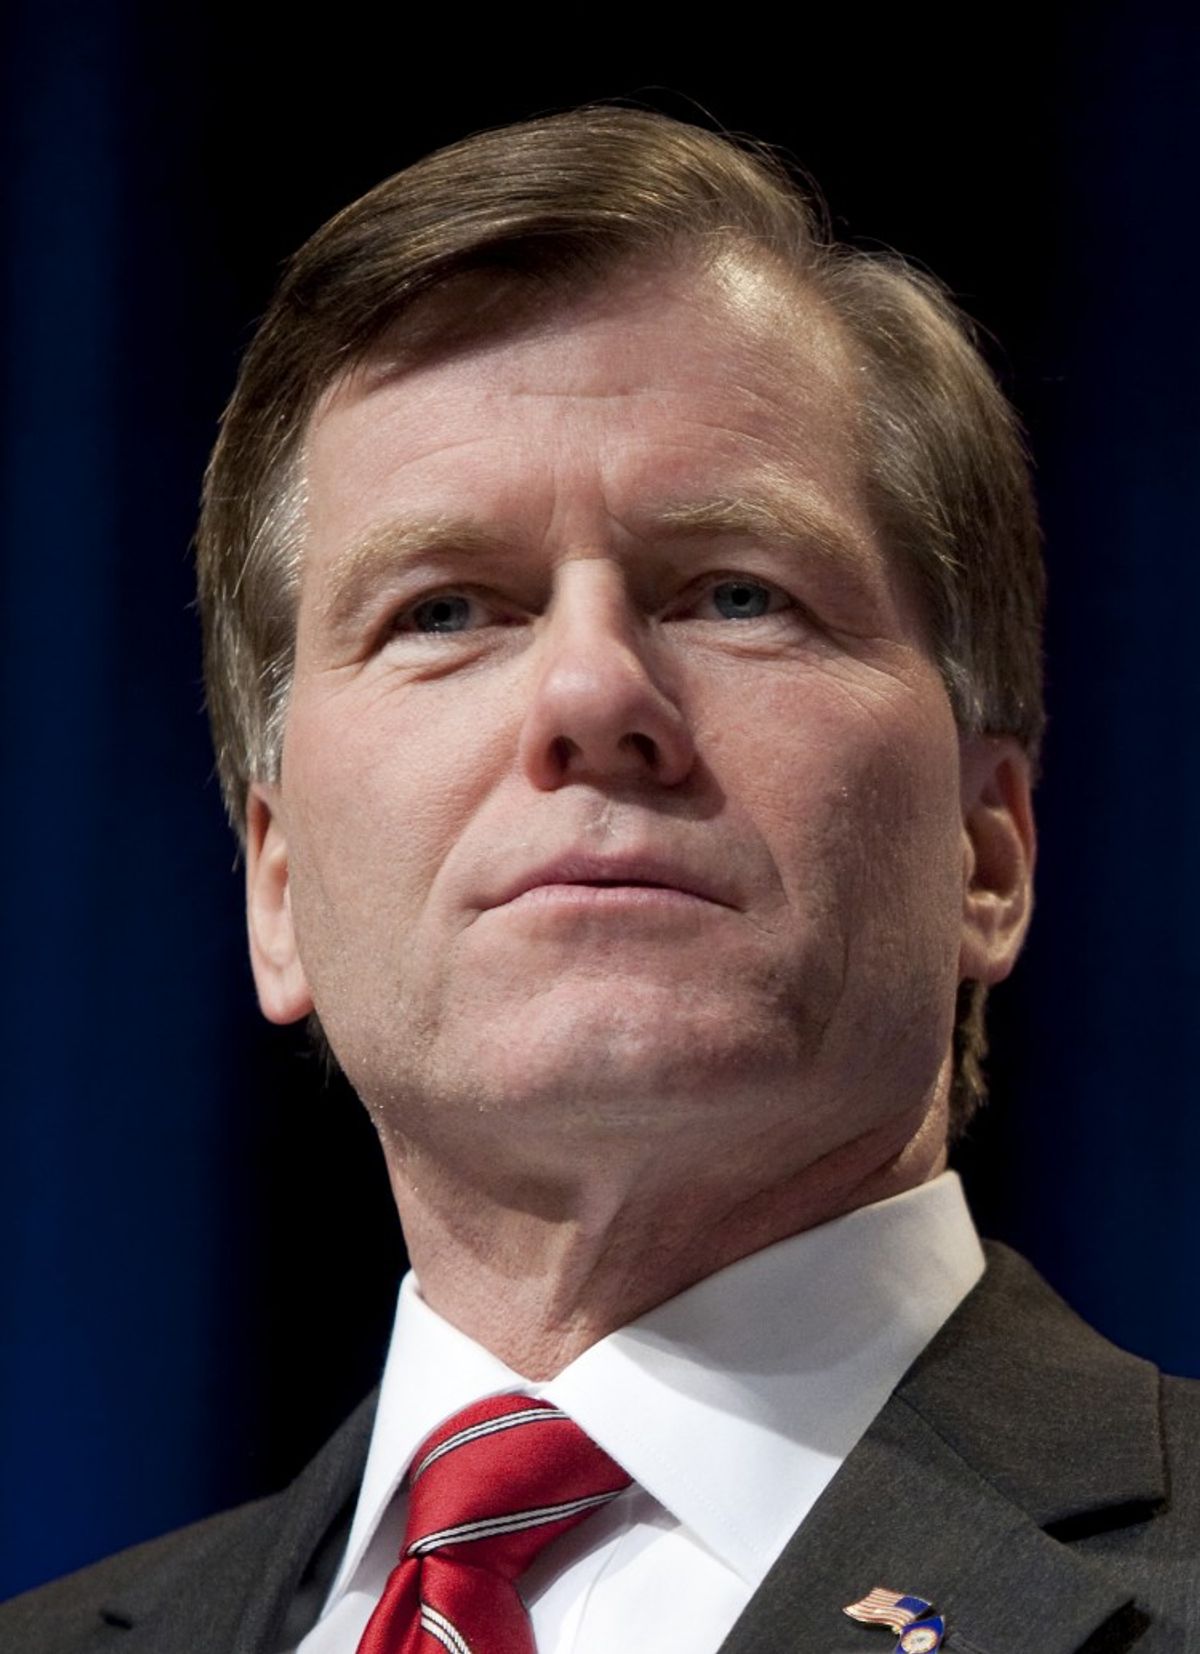 Virginia Governor Bob McDonnell speaks at the Conservative Political Action Conference (CPAC) during their annual meeting in Washington, February 19, 2010.  (Reuters/Joshua Roberts)